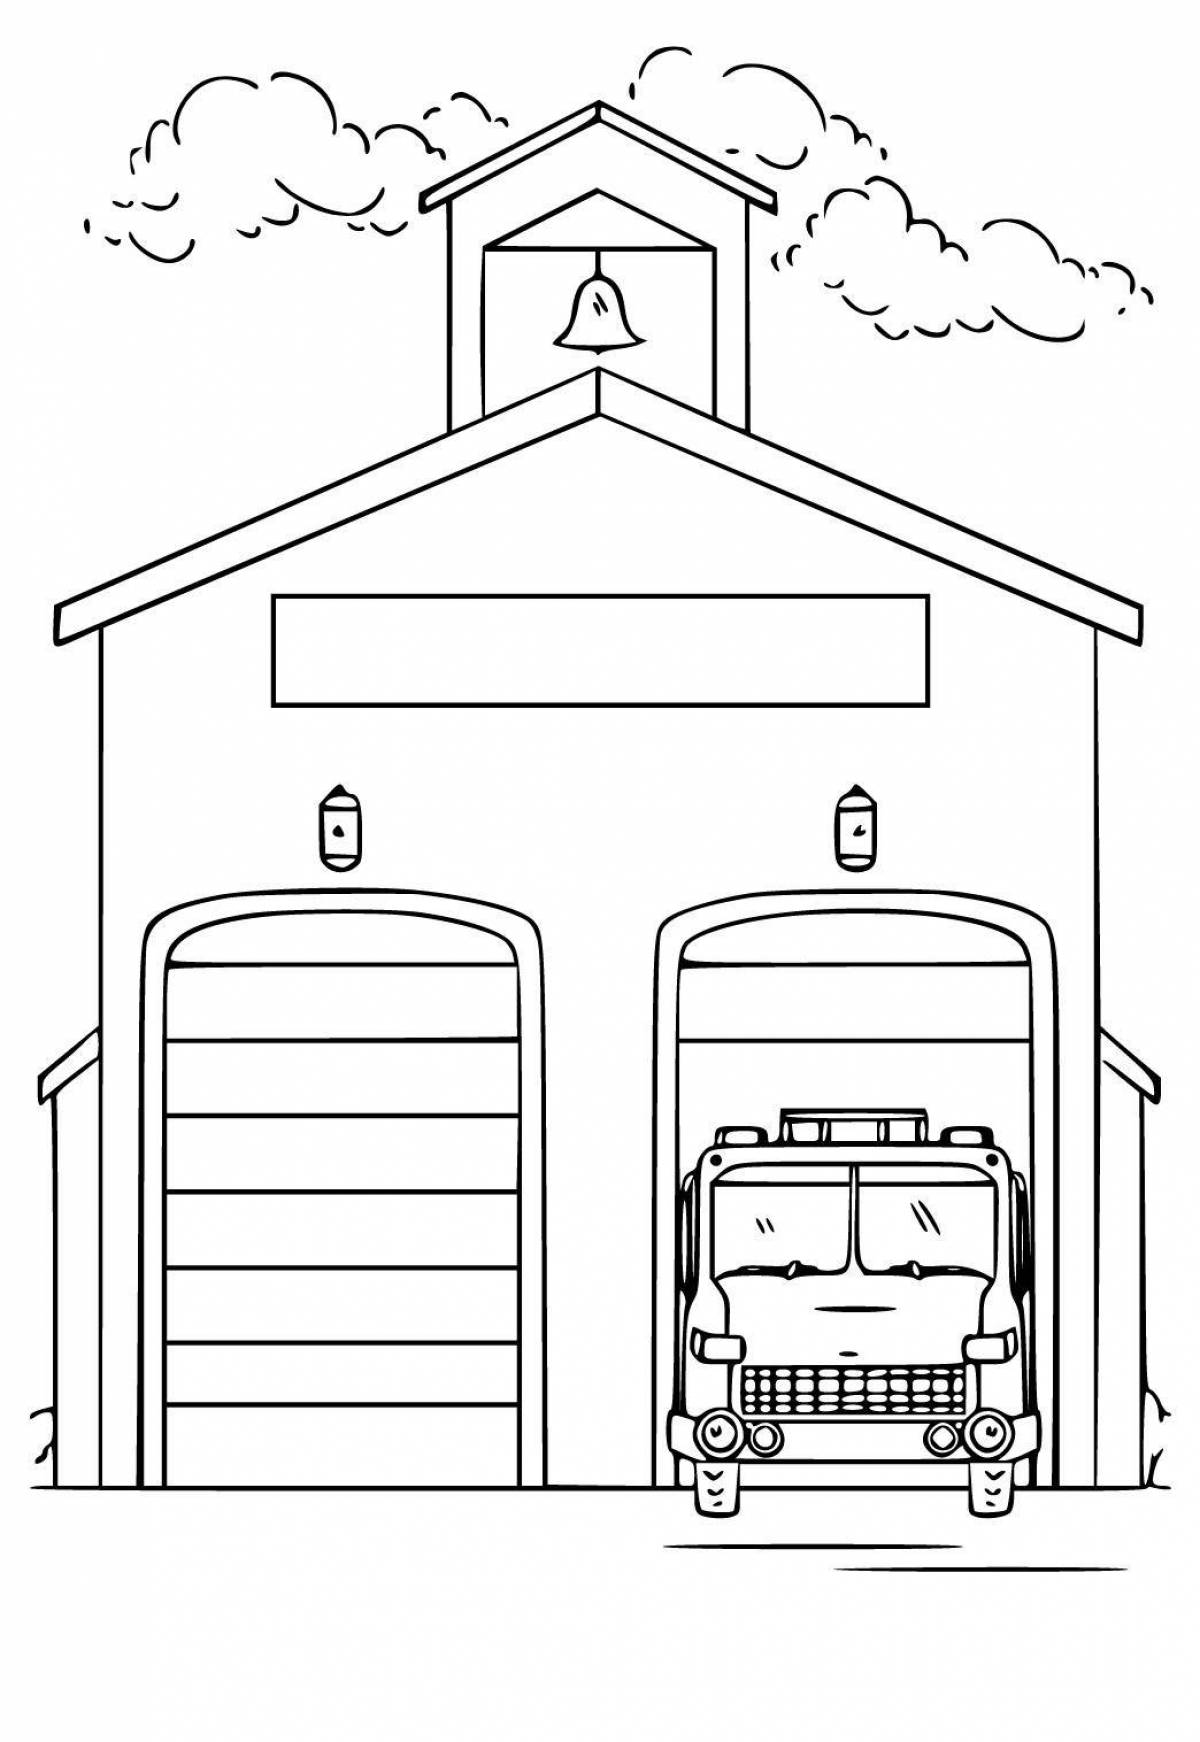 Adorable fire station coloring page